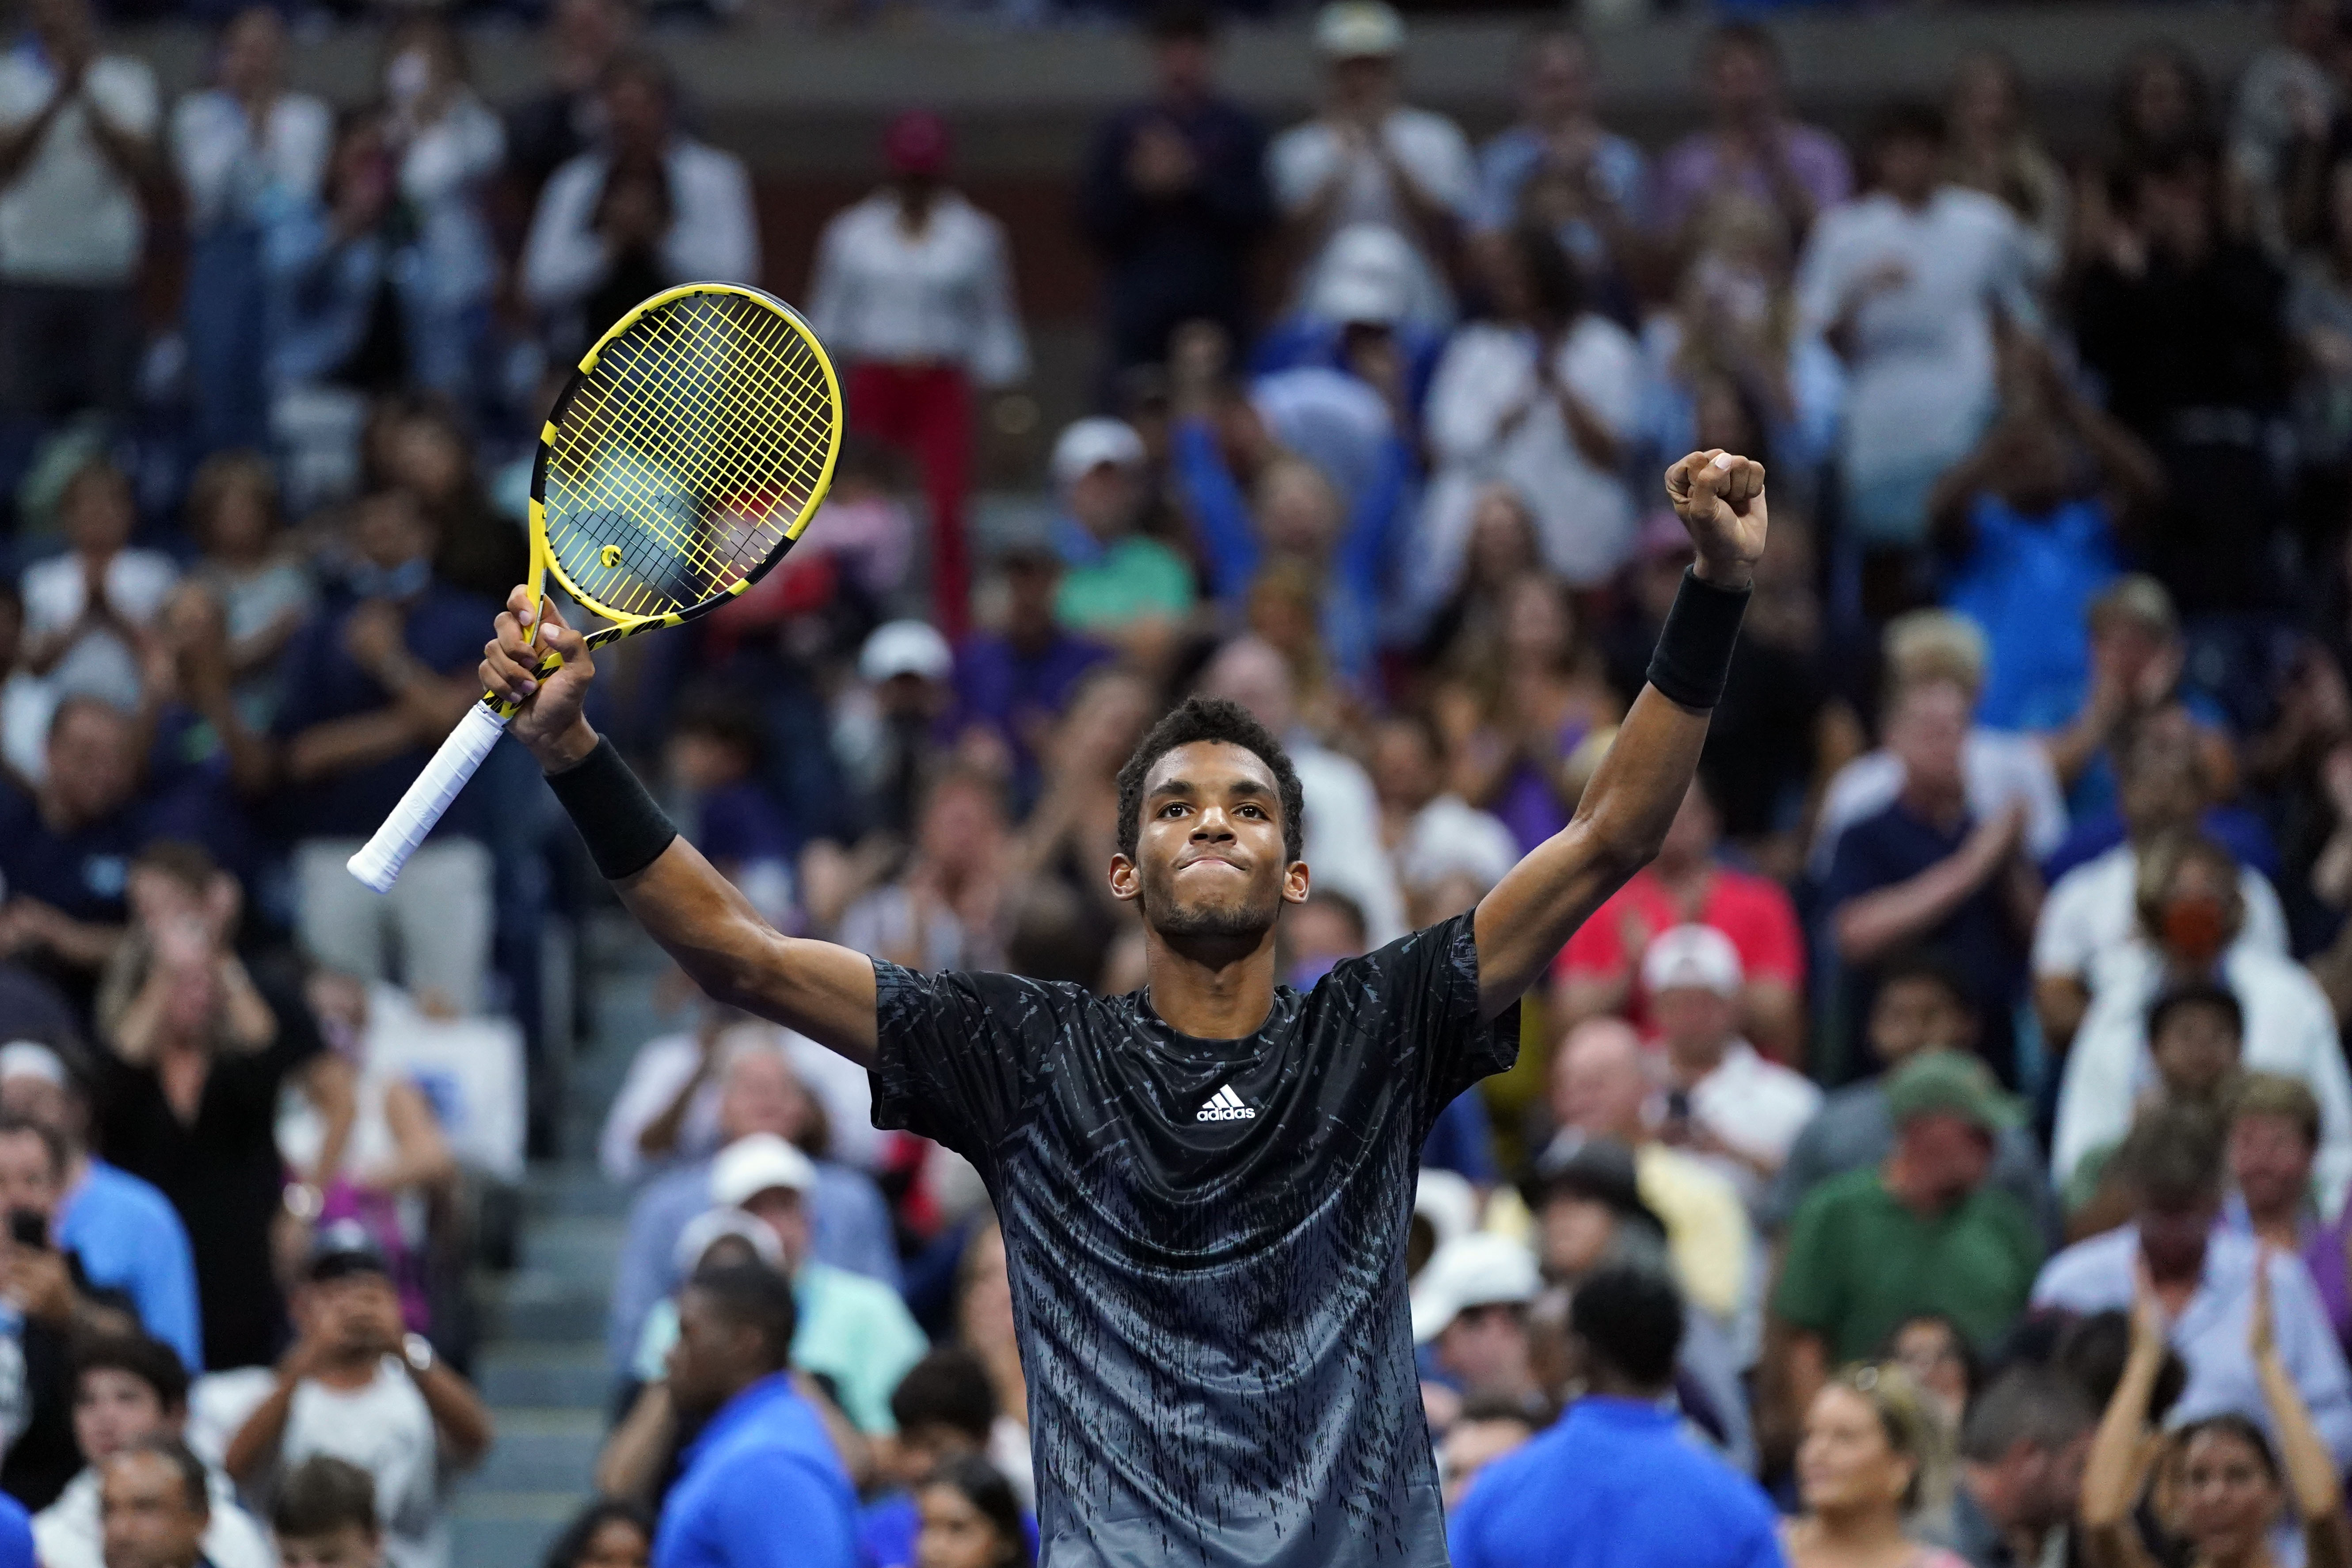 Sep 5, 2021; Flushing, NY, USA; Felix Auger-Aliassime of Canada defeats Frances Tiafoe of the United States (not pictured) on day seven of the 2021 U.S. Open tennis tournament at USTA Billie Jean King National Tennis Center. Mandatory Credit: Danielle Parhizkaran-USA TODAY Sports